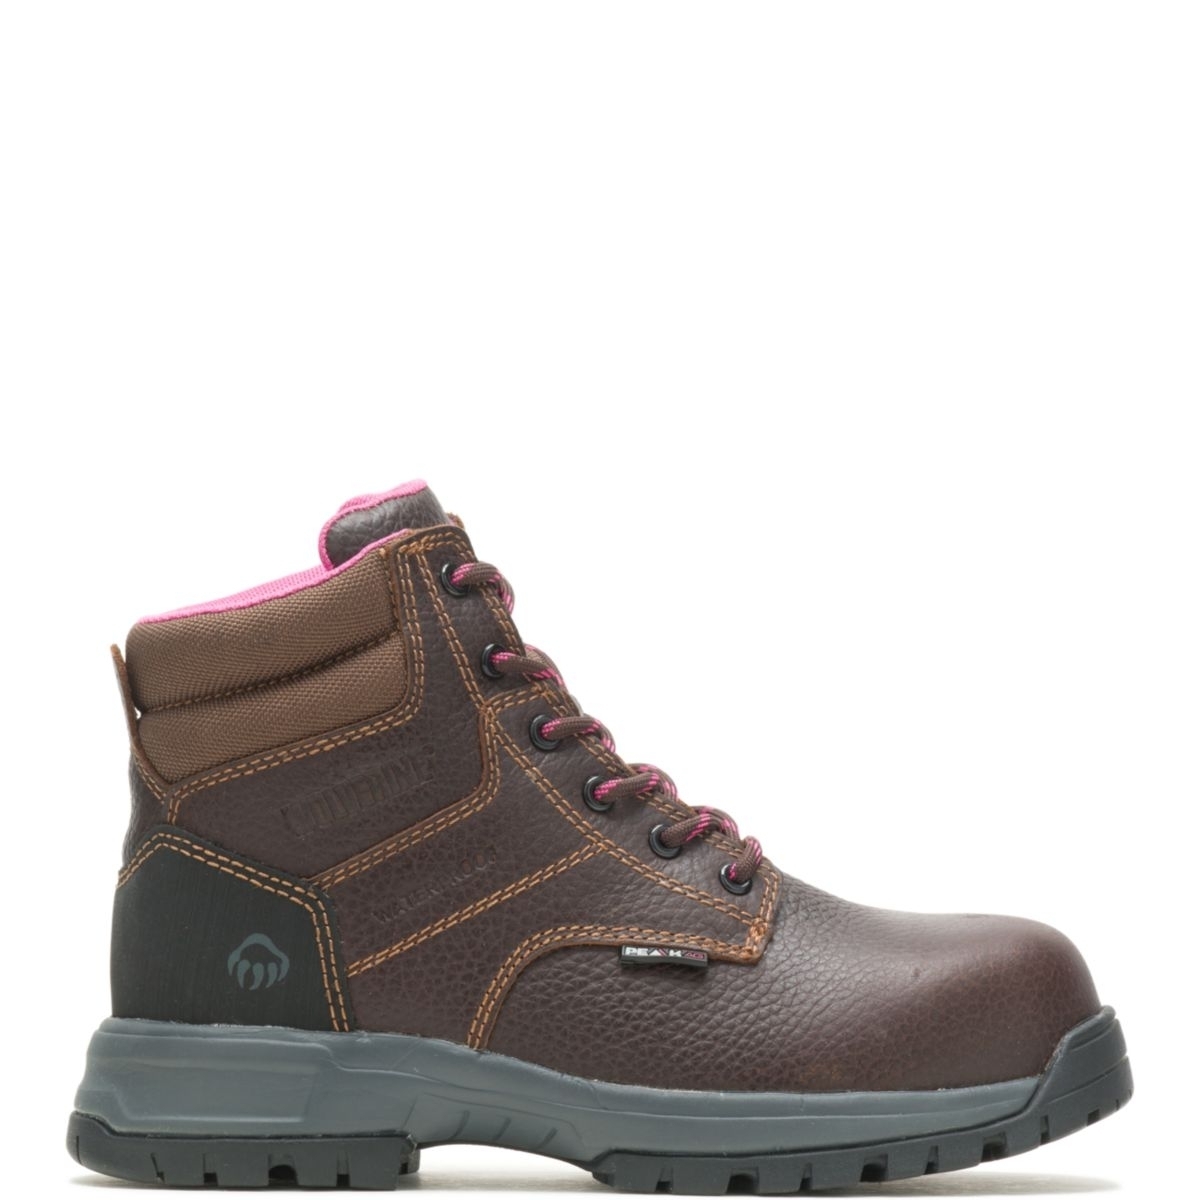 WOLVERINE Women's Piper Composite Toe Work Boot Brown - W10180 BROWN - BROWN, 9-D